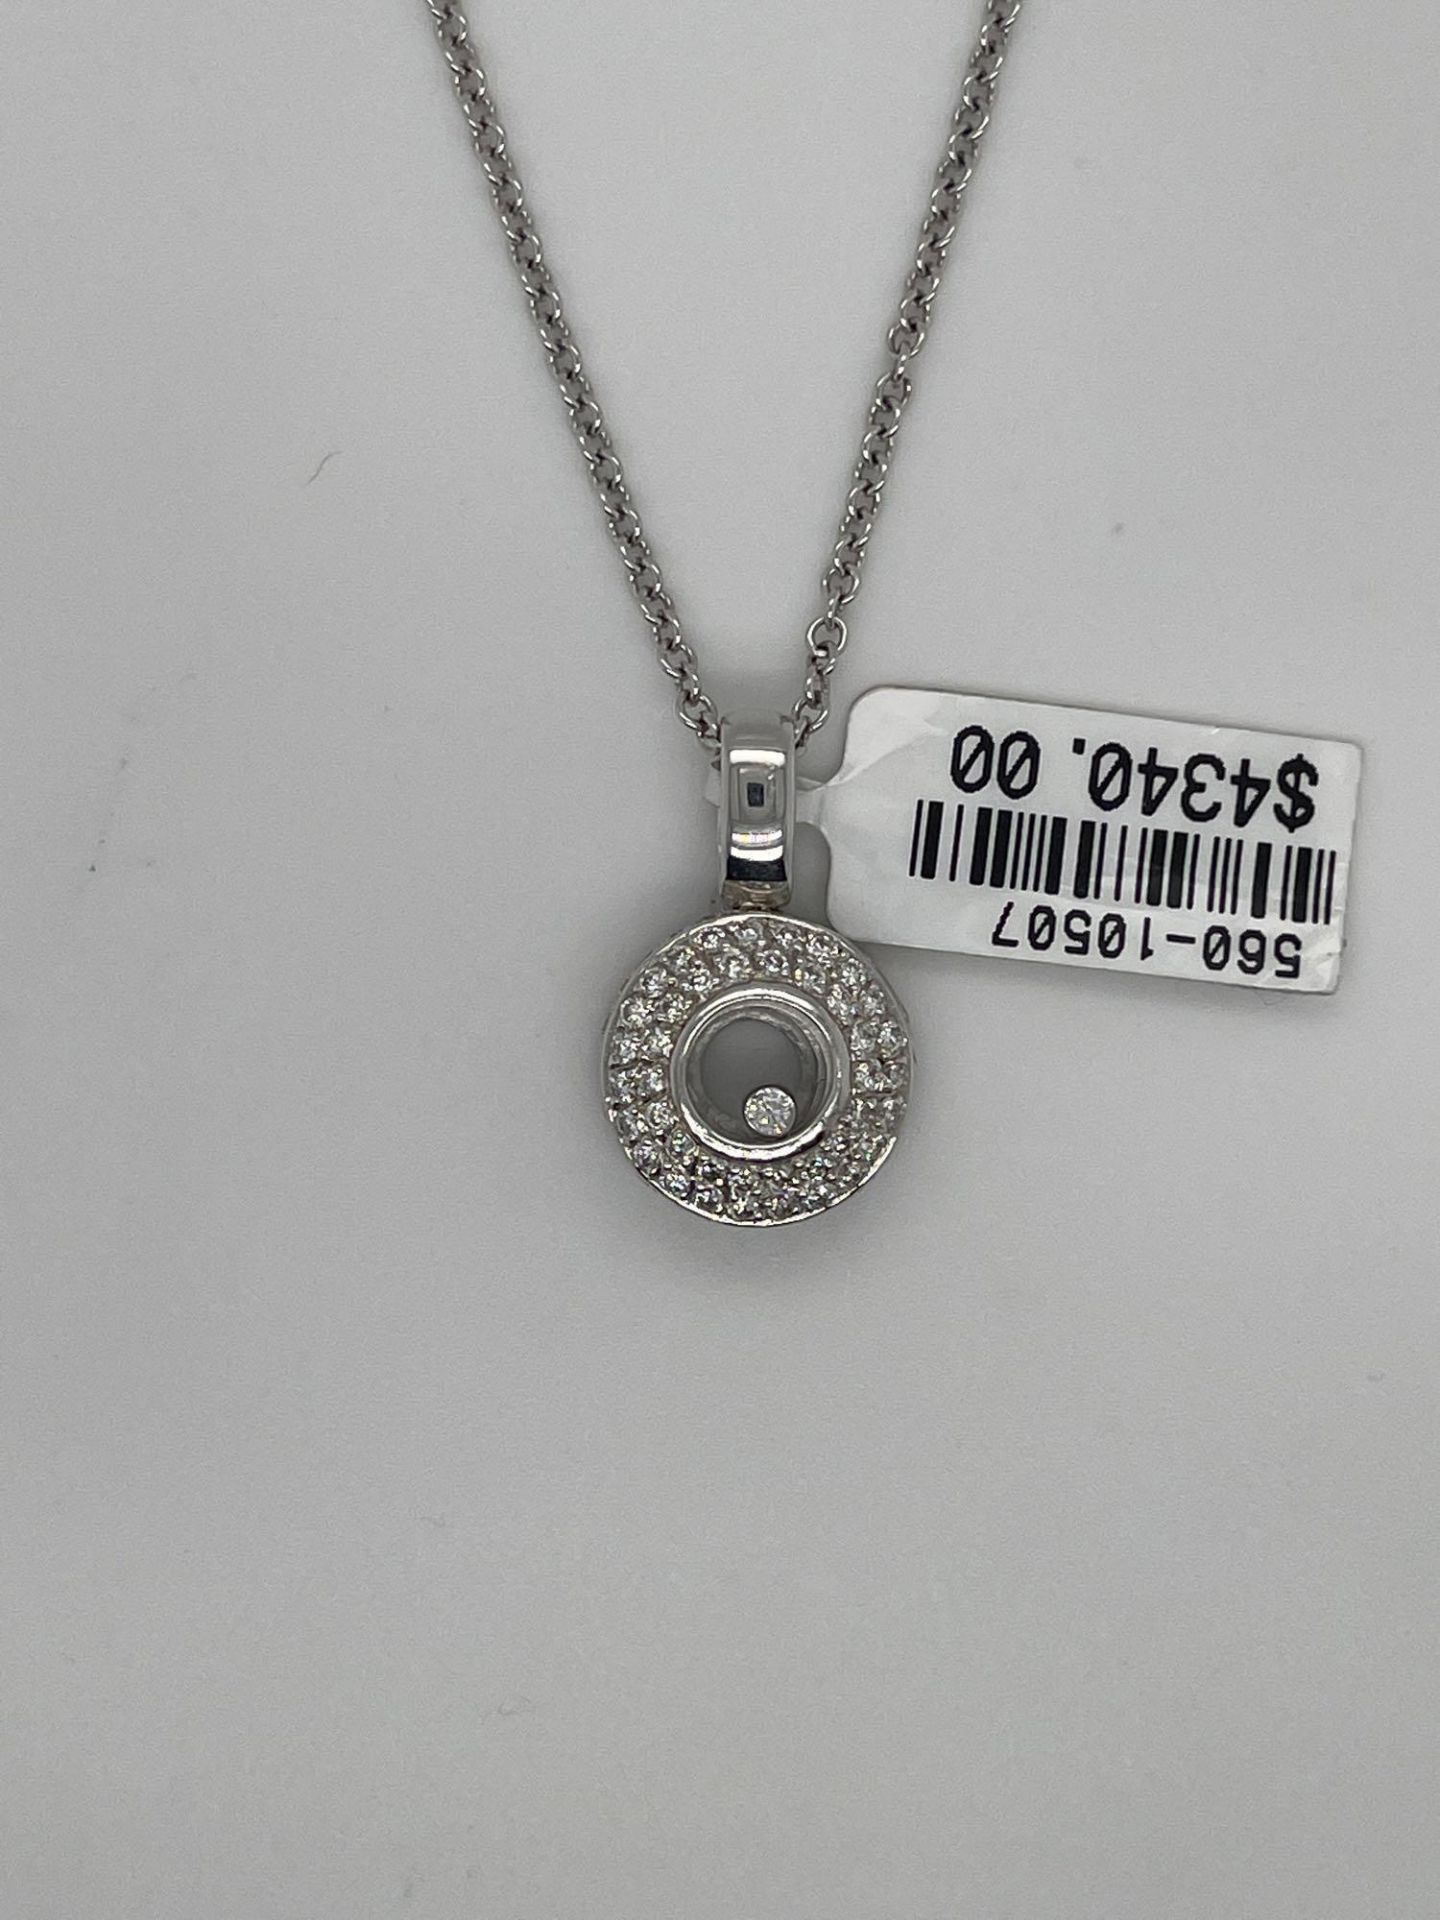 18KT WHITE GOLD CIRCLE DIAMOND EARRINGS .80CT PAVE DIAMONDS/ .80CT 18KT WHITE GOLD NECKLACE .80CT DI - Image 8 of 10